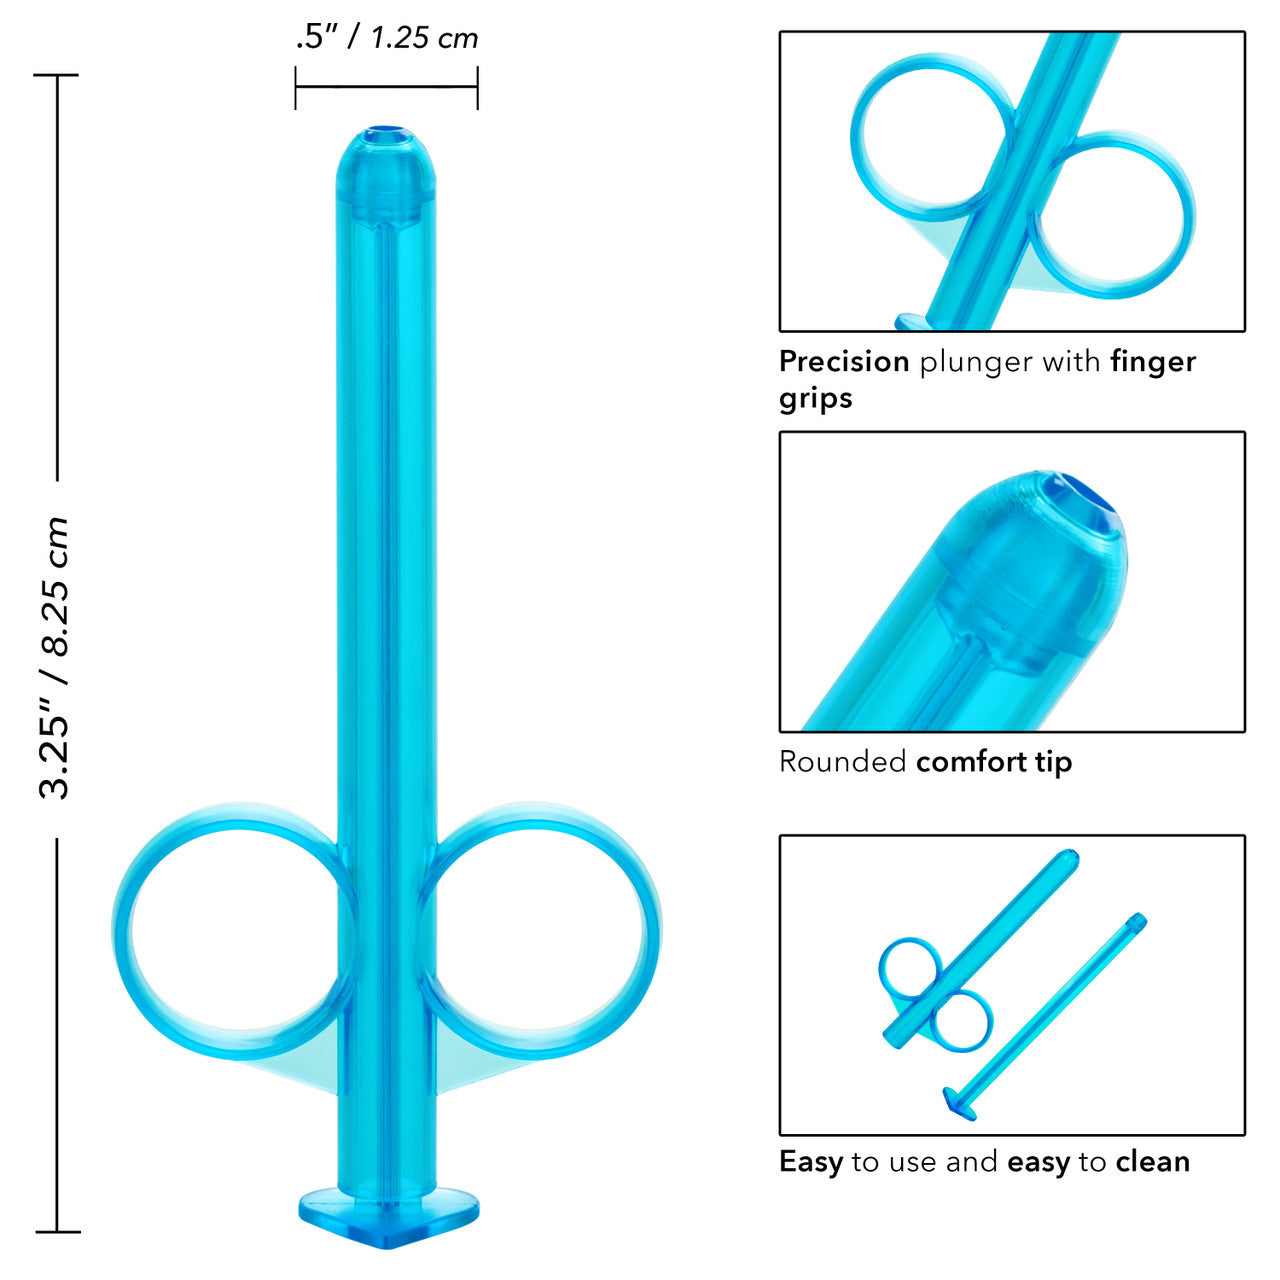 Lube Tube Applicator 2 Pack - Blue - Thorn & Feather